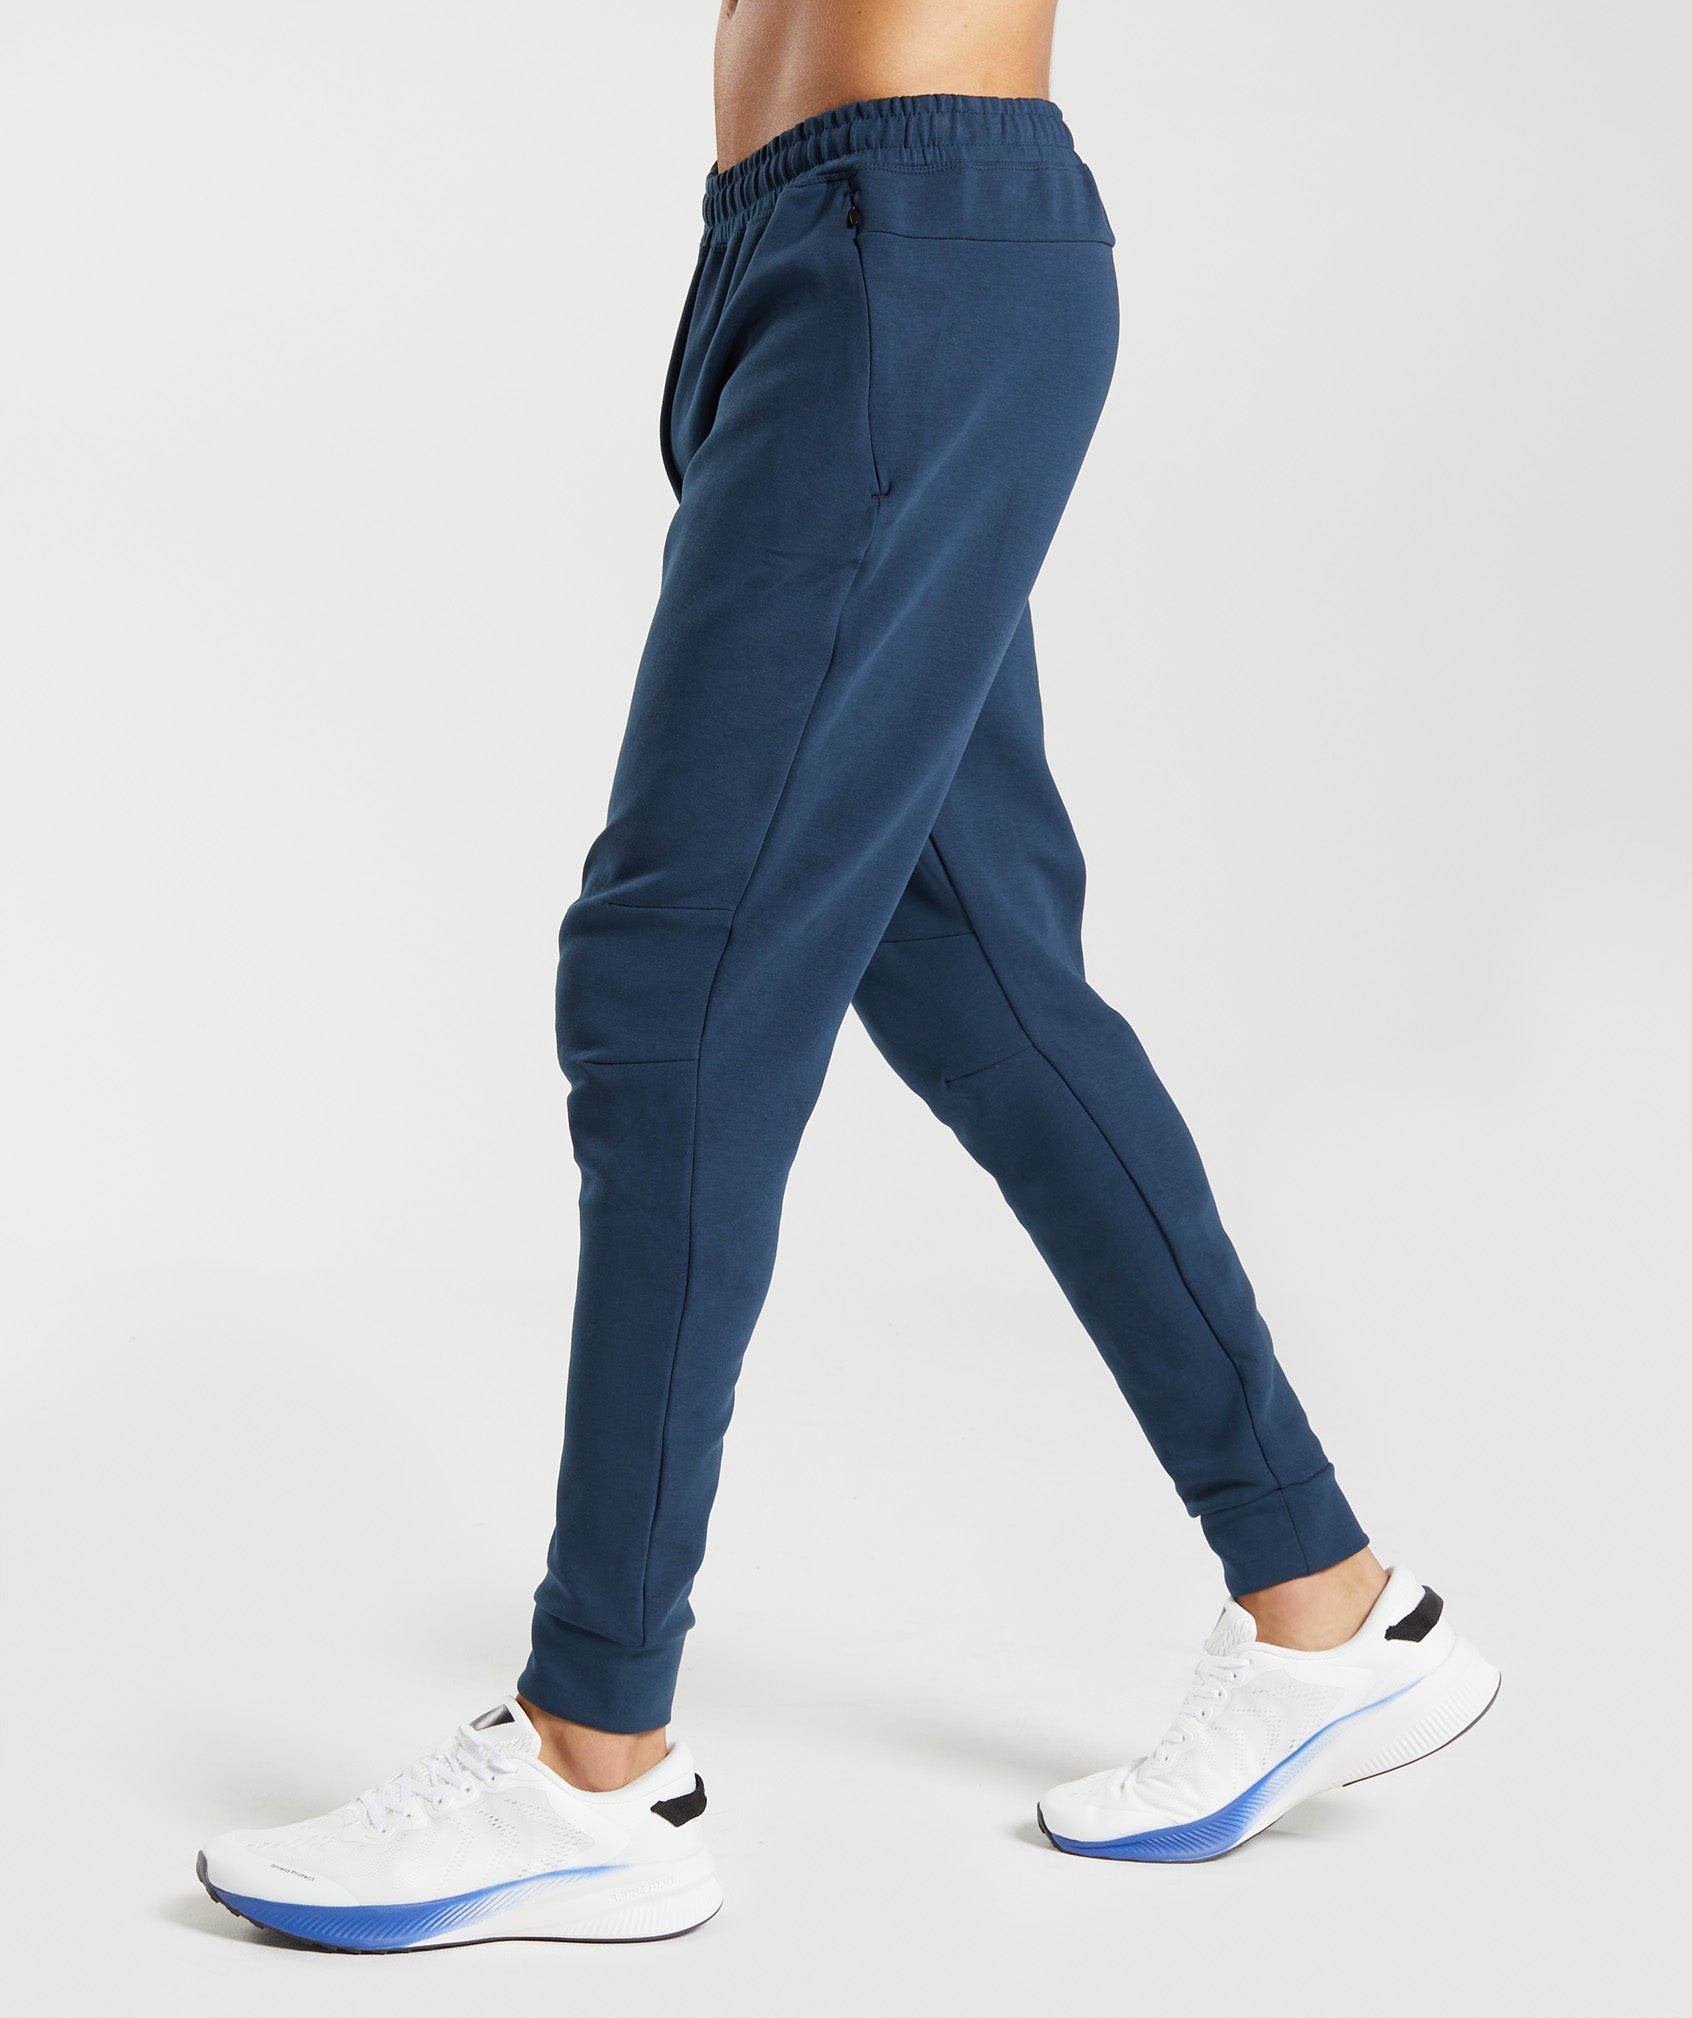 Rest Day Knit Joggers in Navy